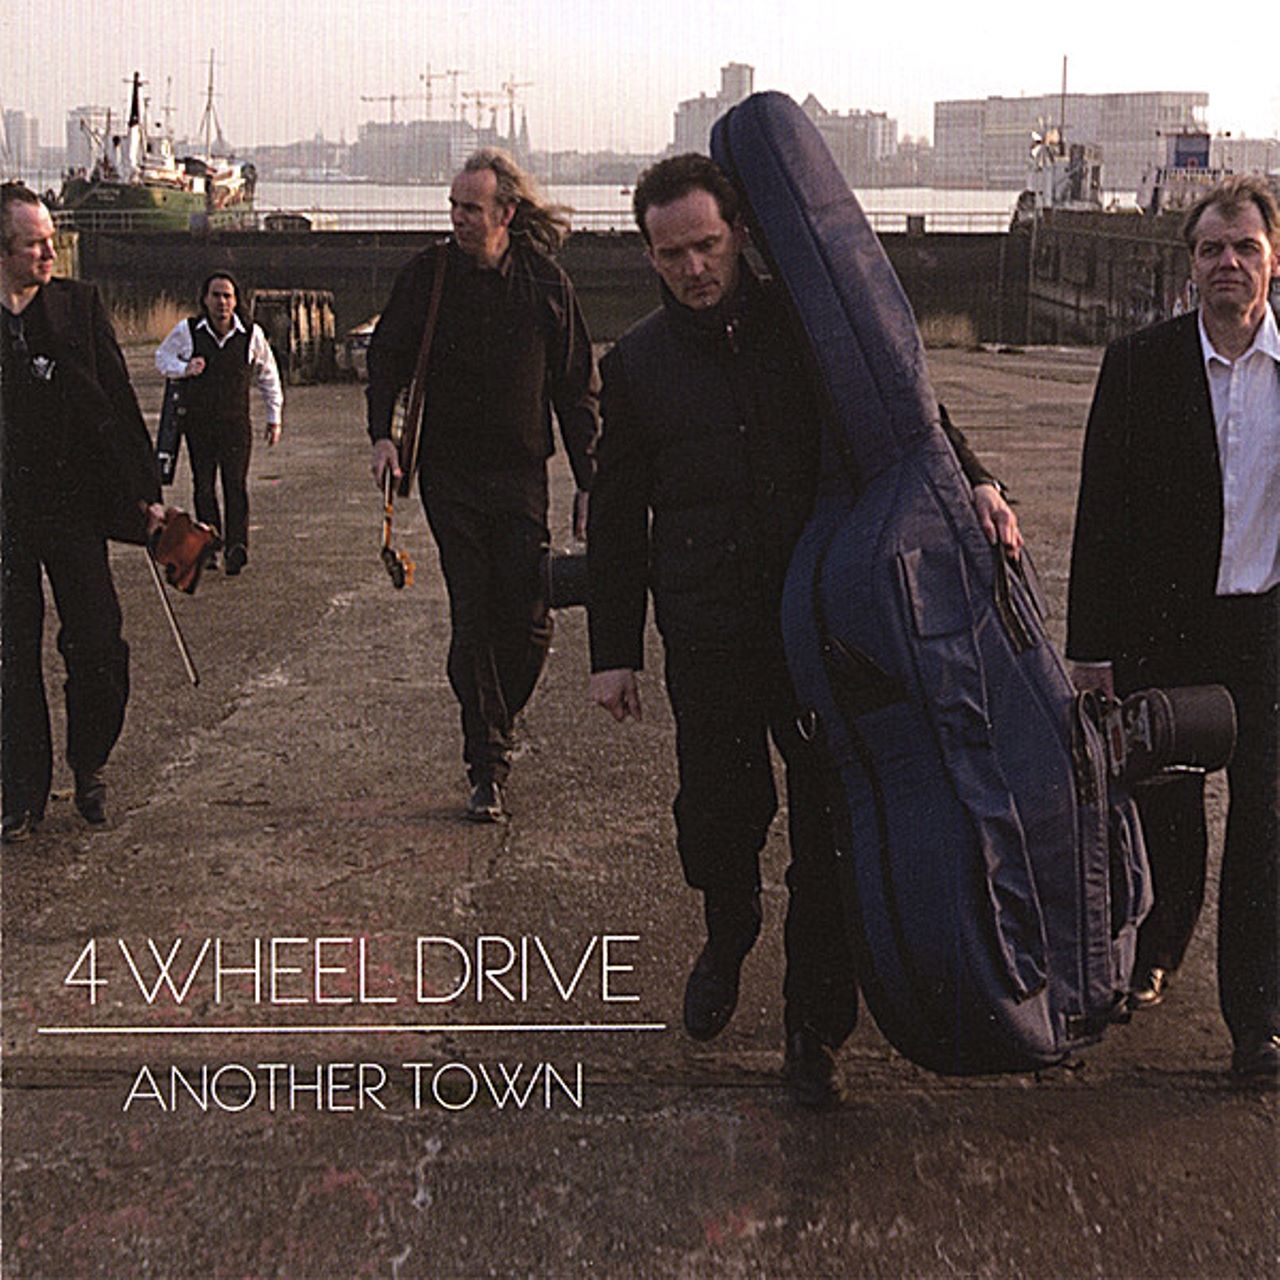 4 Wheel Drive - Another Town cover album